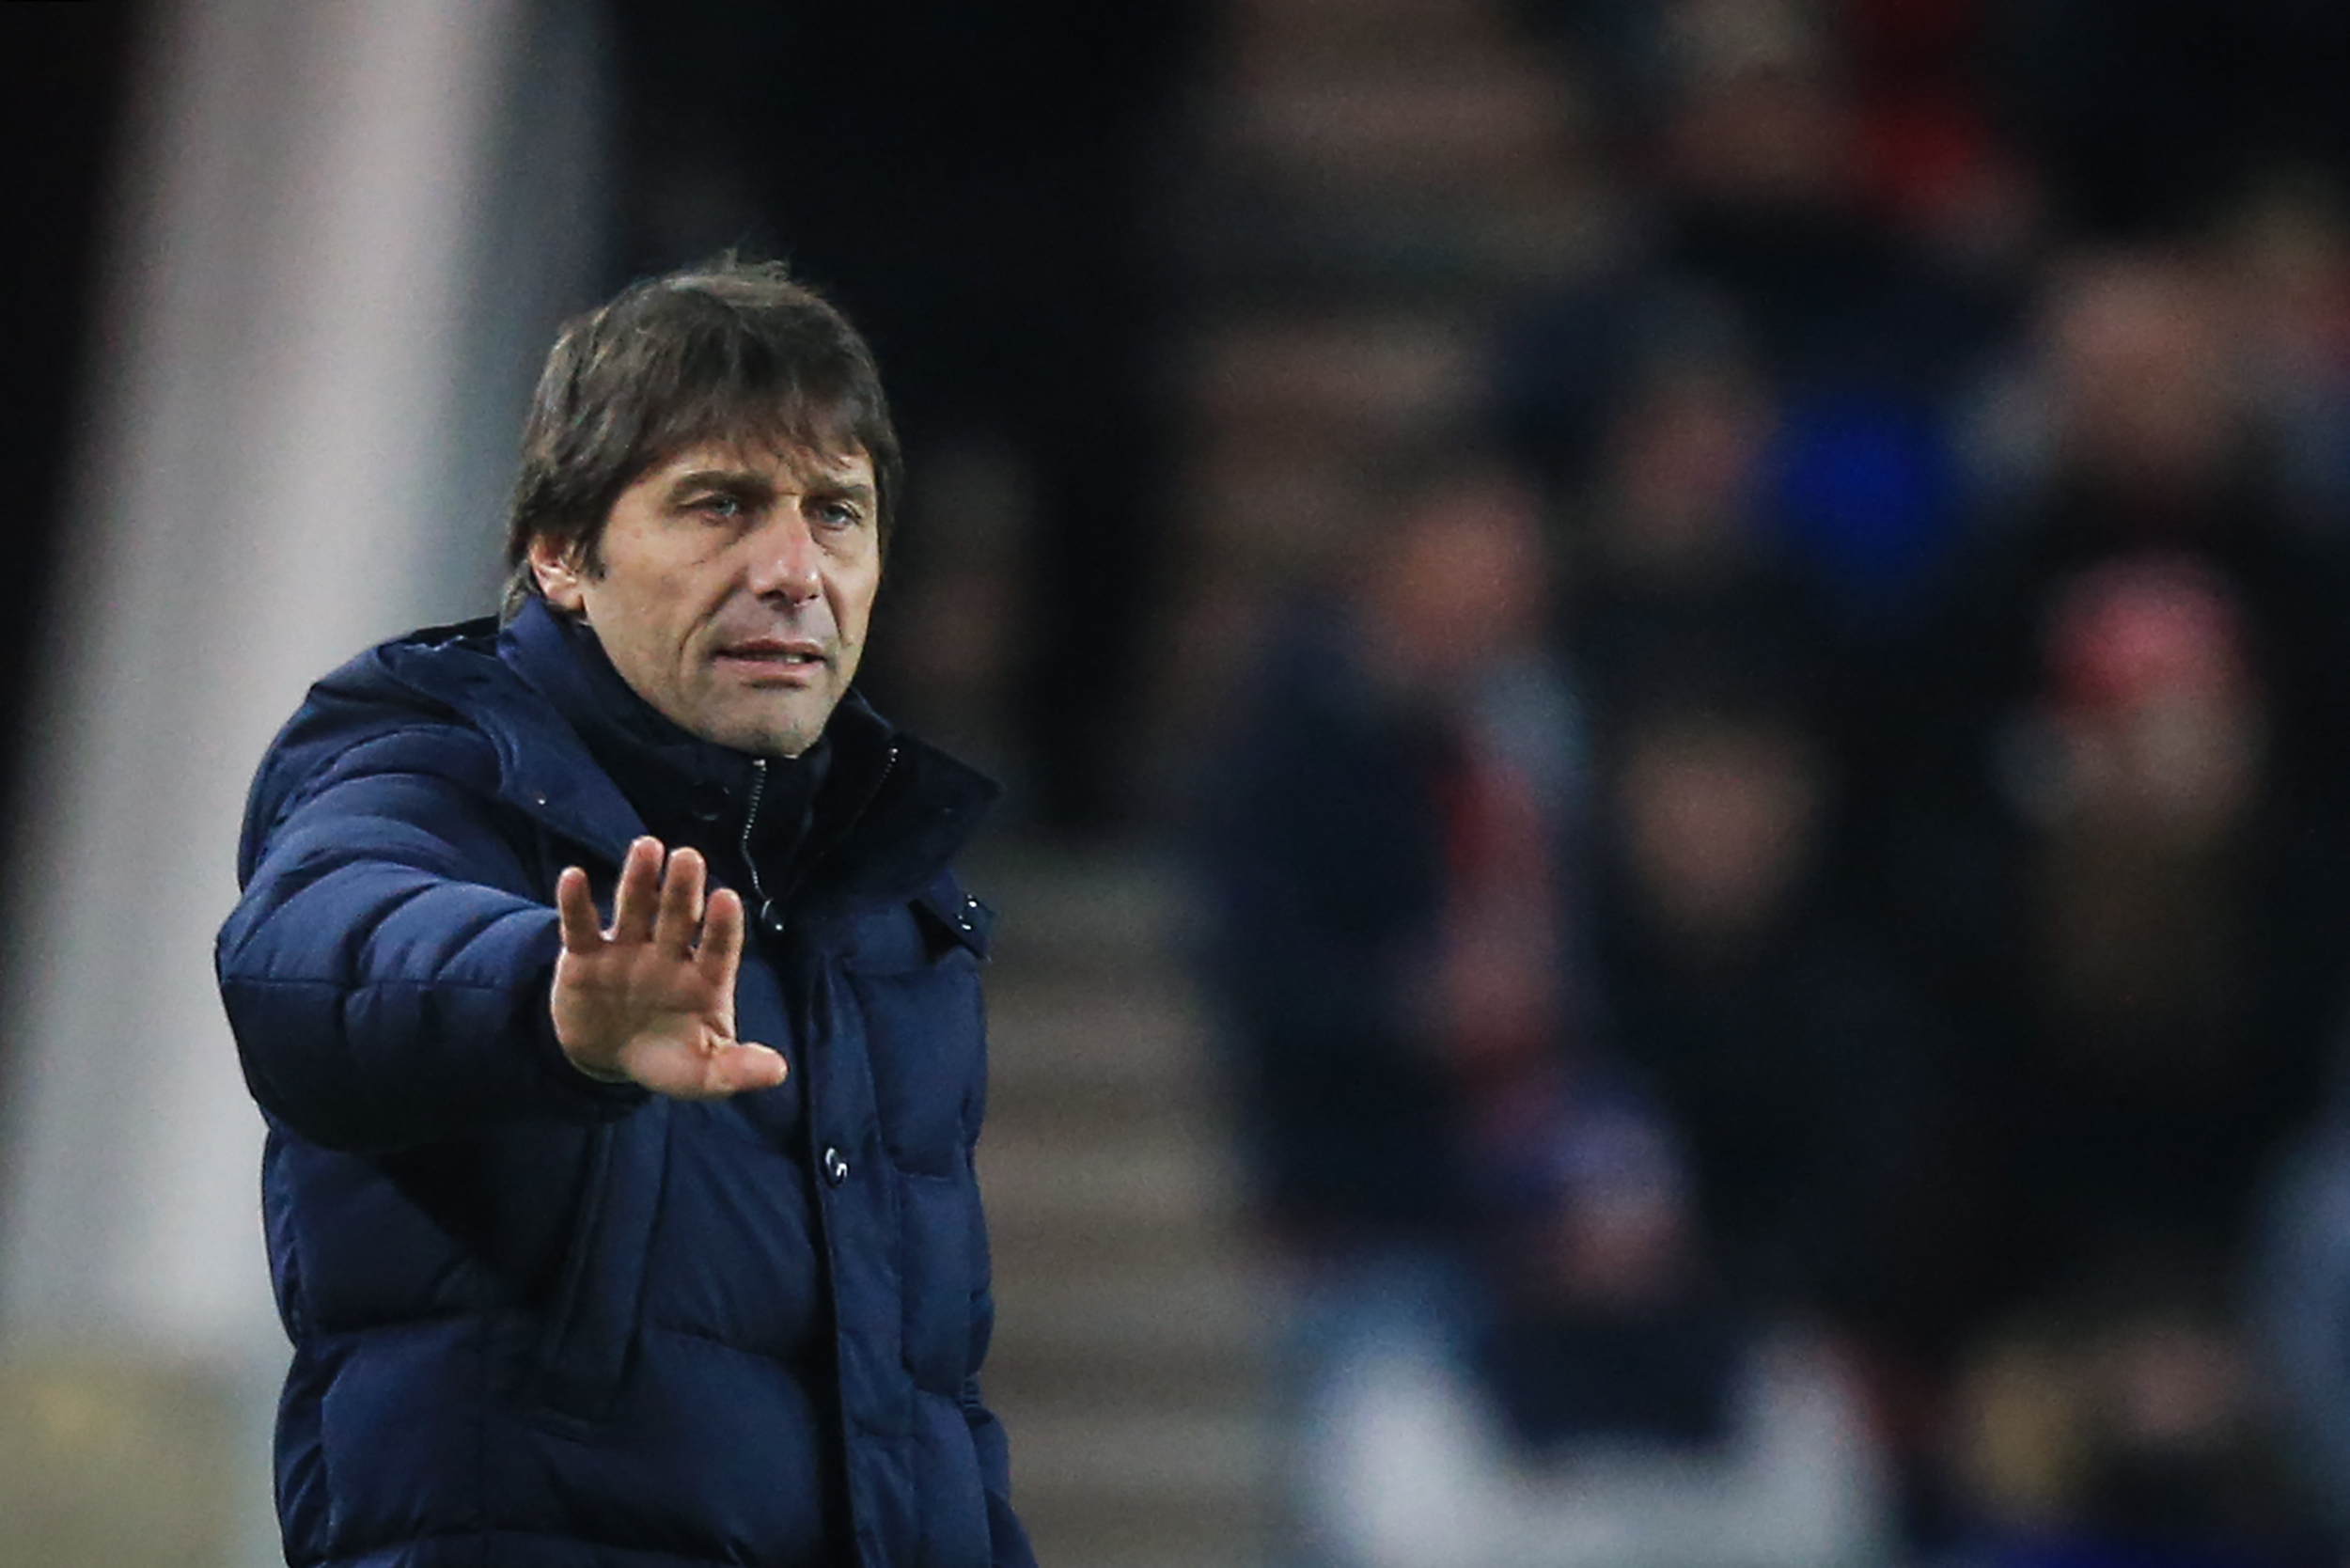 Antonio Conte reacts on the sidelines. (Photo by LINDSEY PARNABY/AFP via Getty Images)